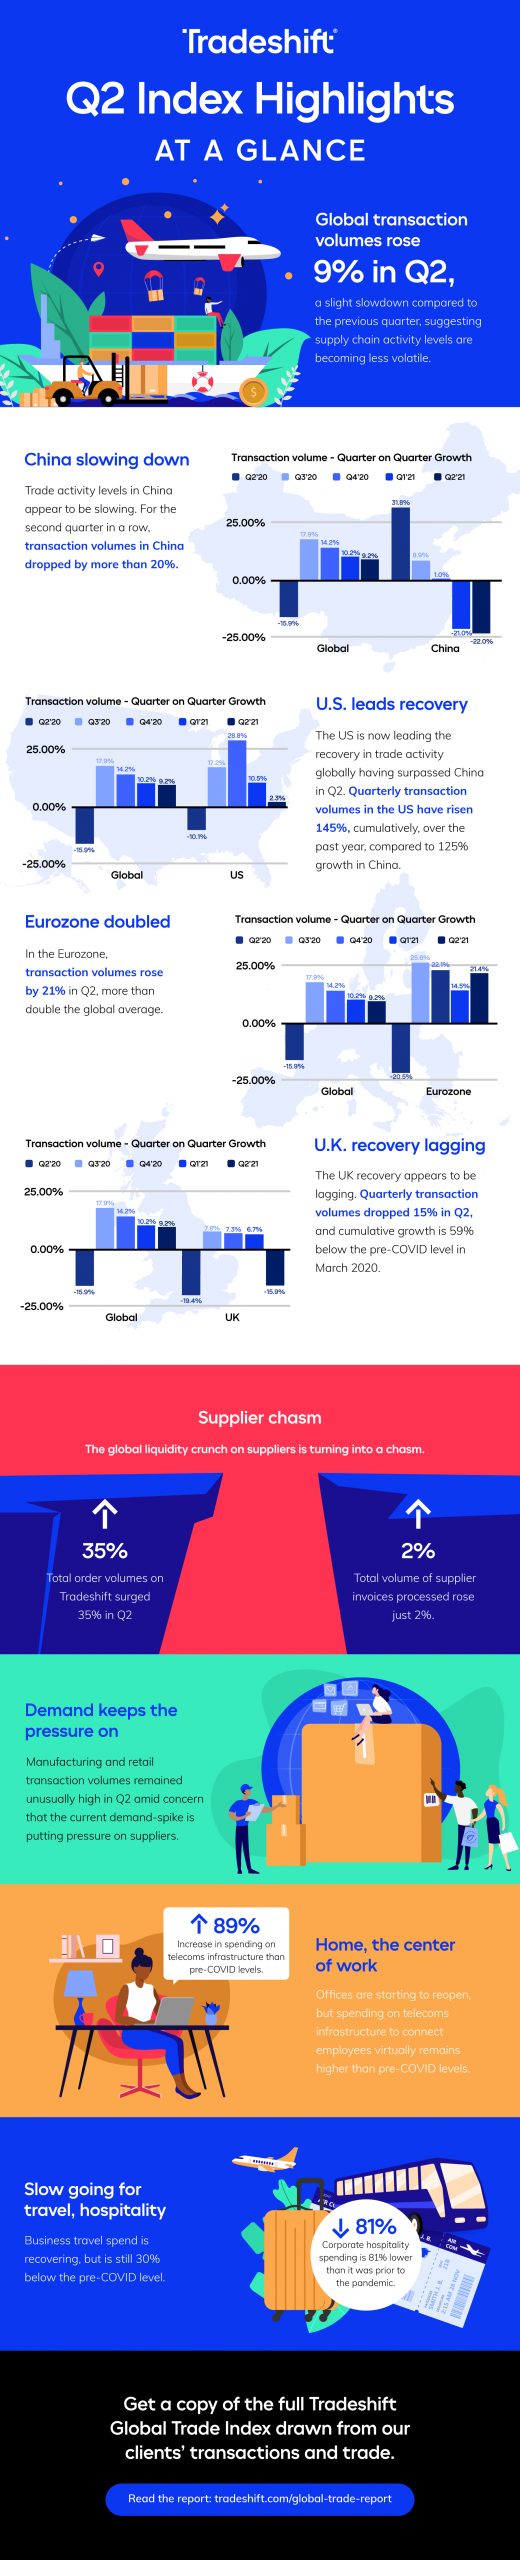 global trade health q2 infographic